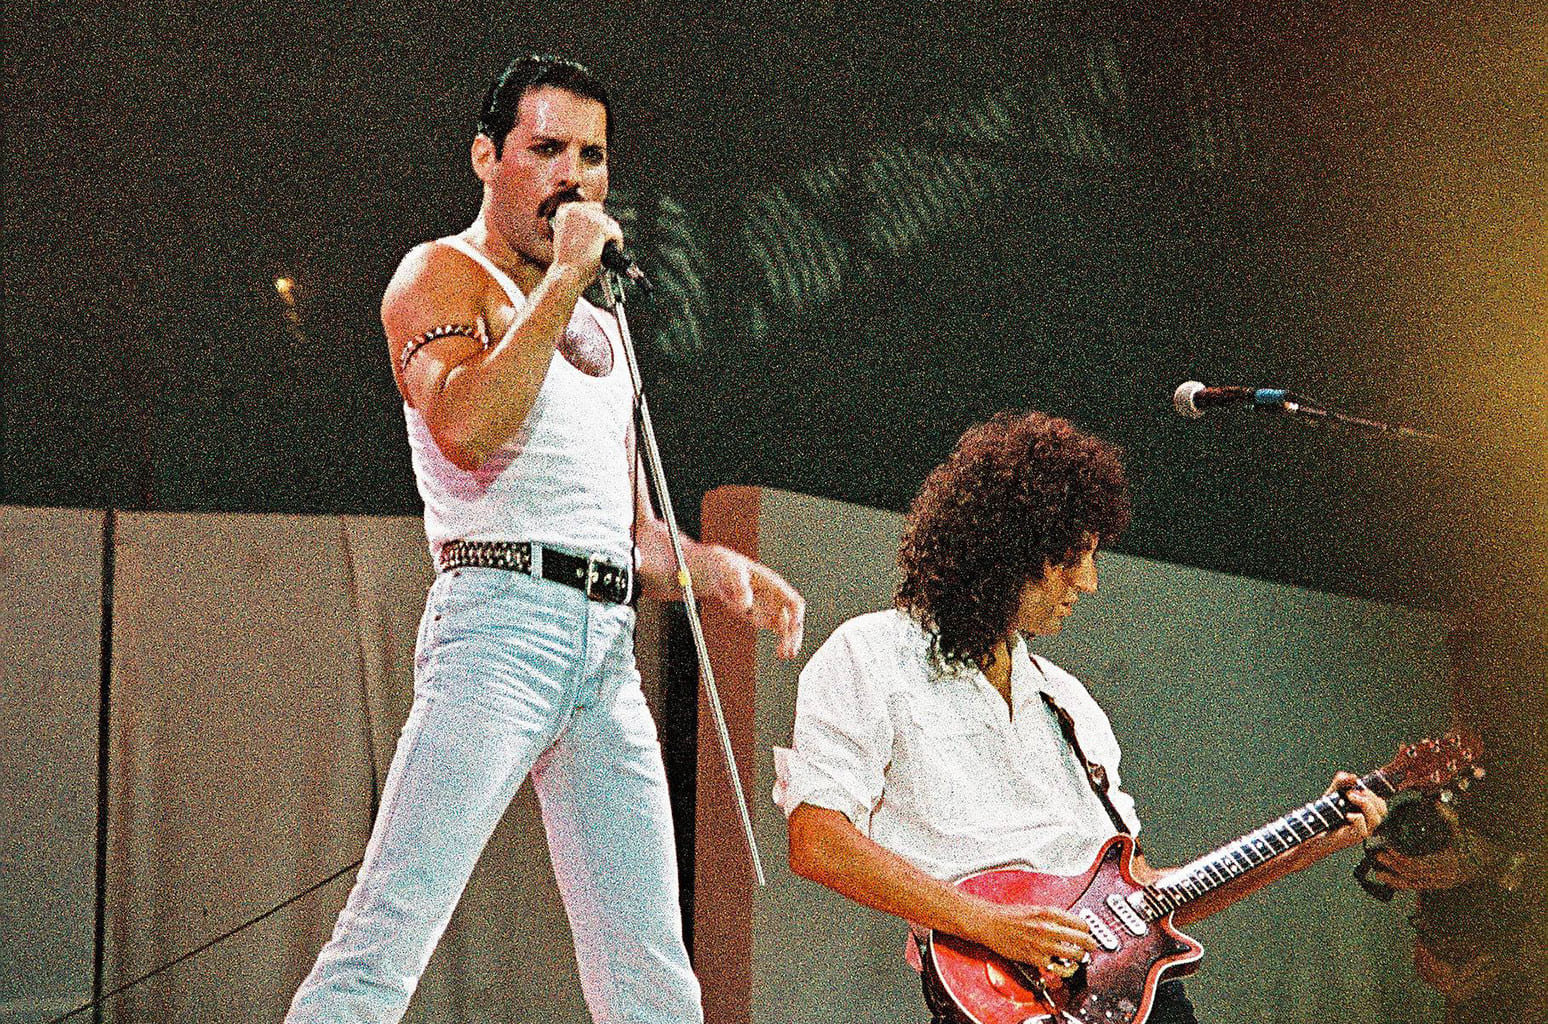 Freddie at the 1985 Live Aid benefit concert